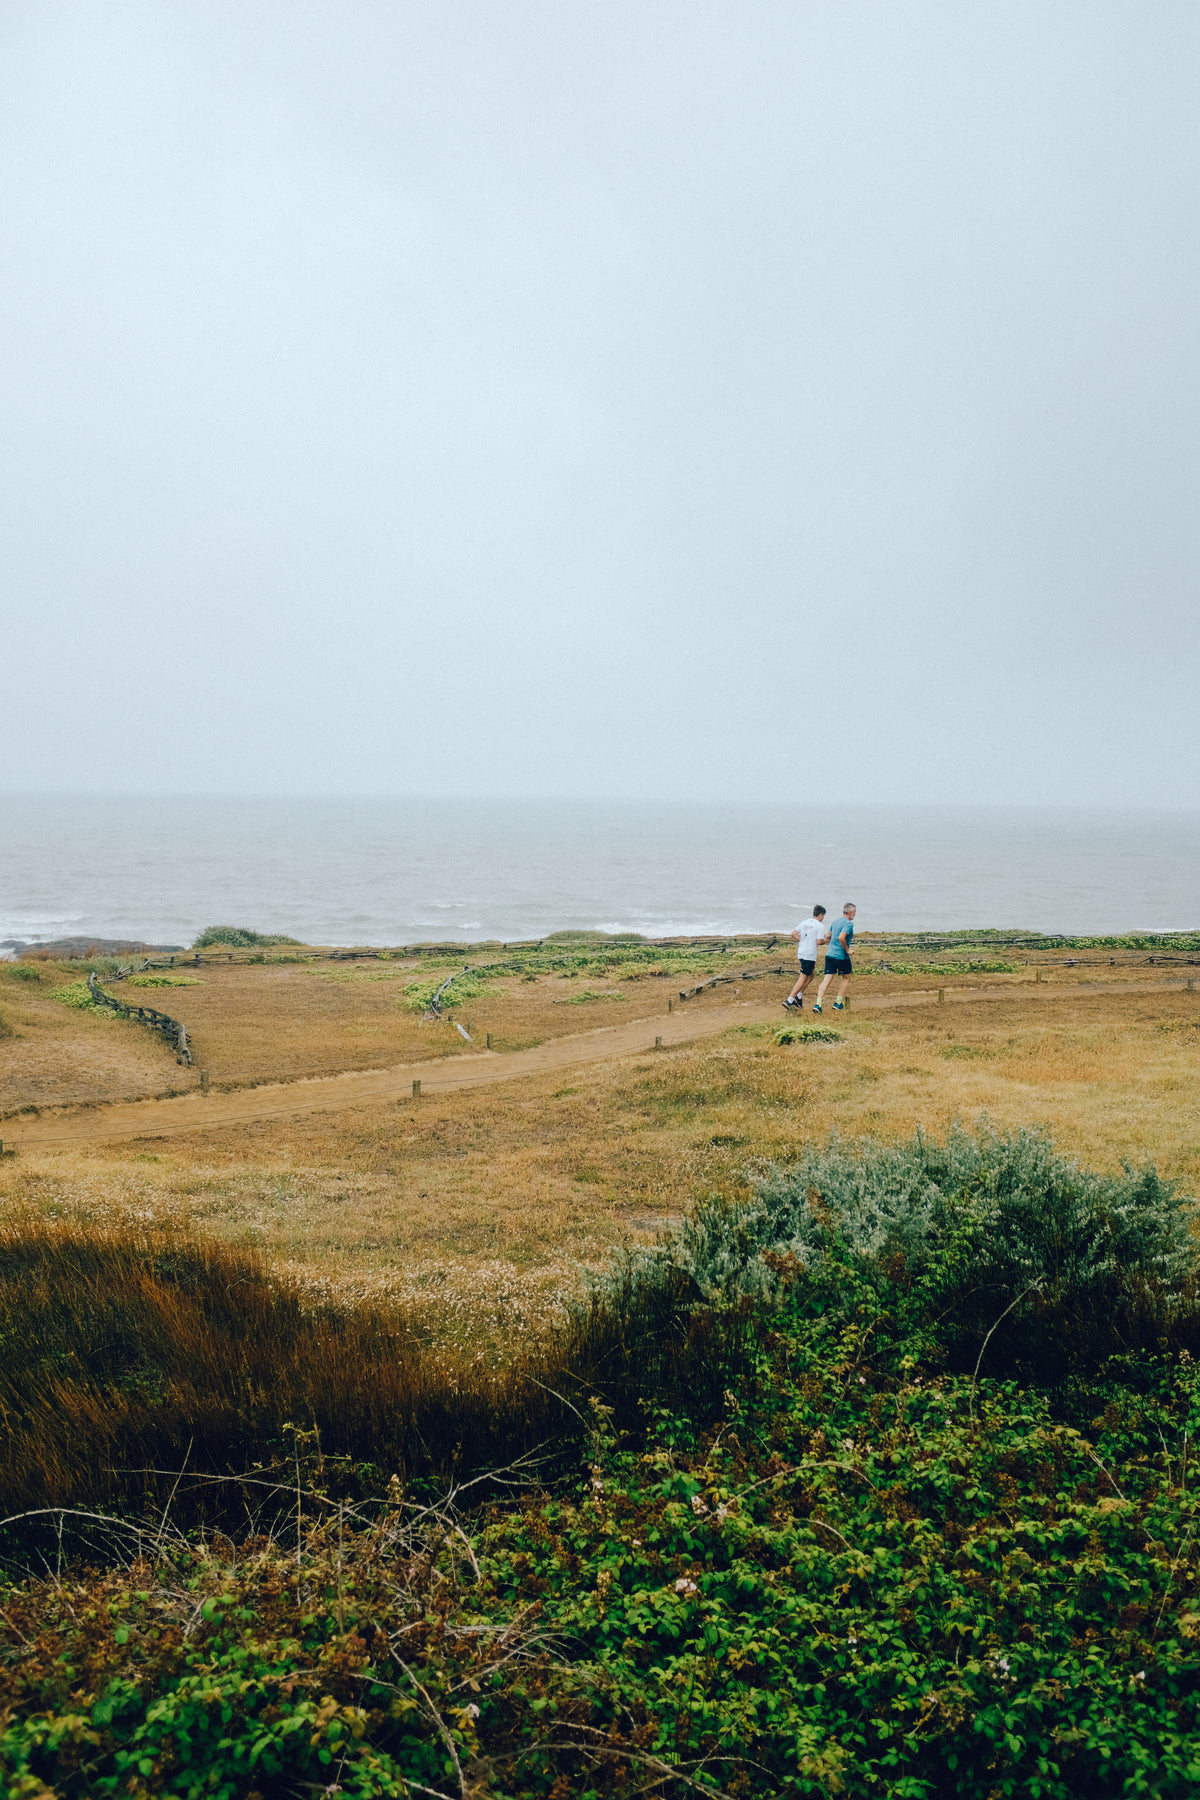 two people running on a coastal trail by the ocean